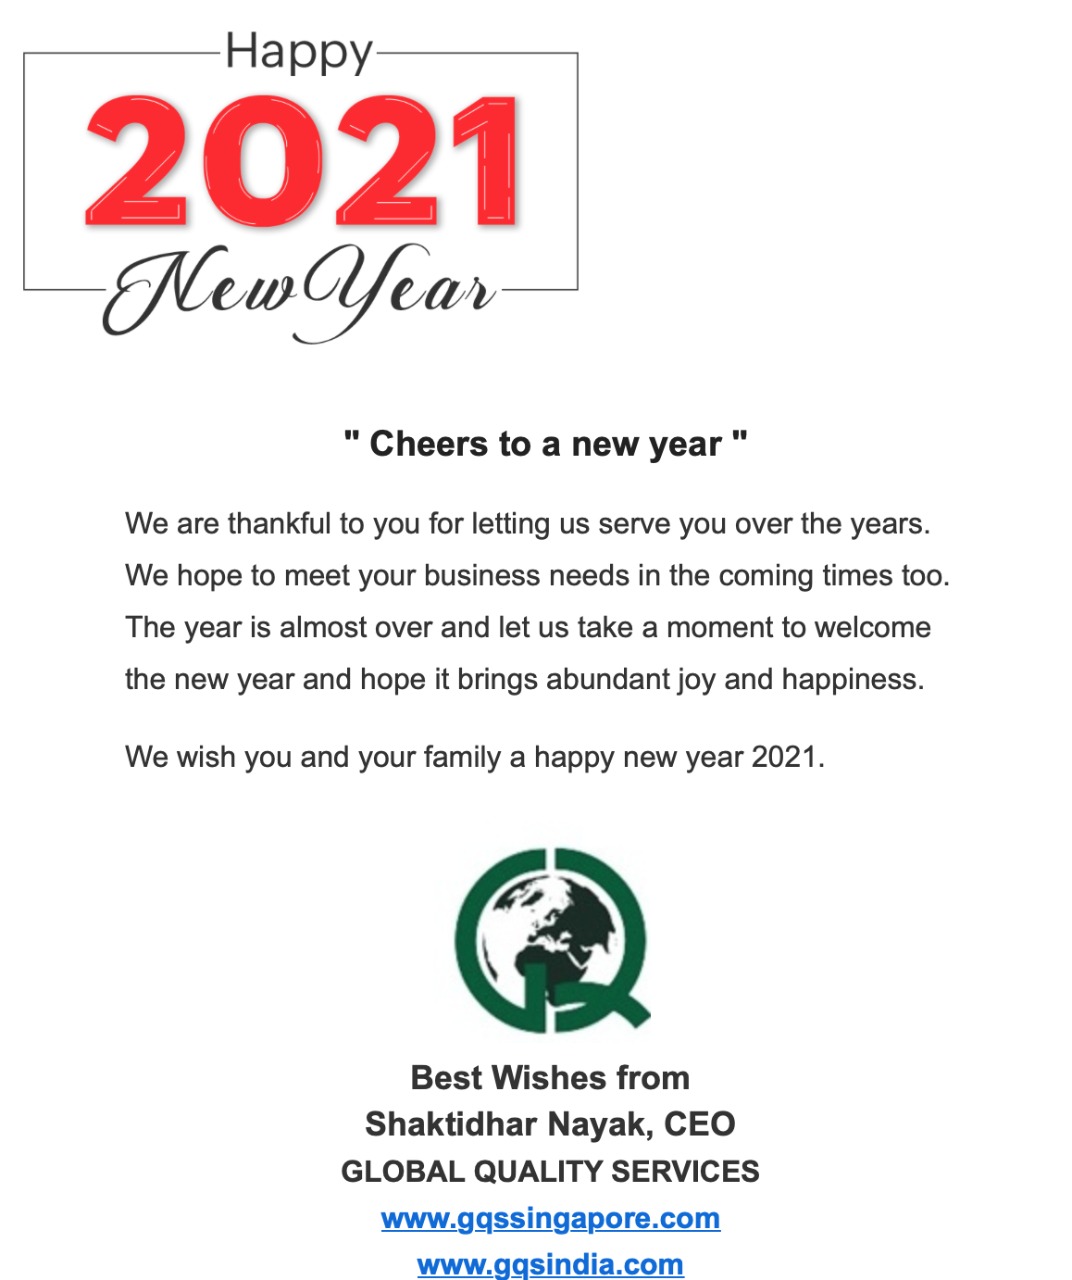 Happy New Year 2021 From Global Quality Services